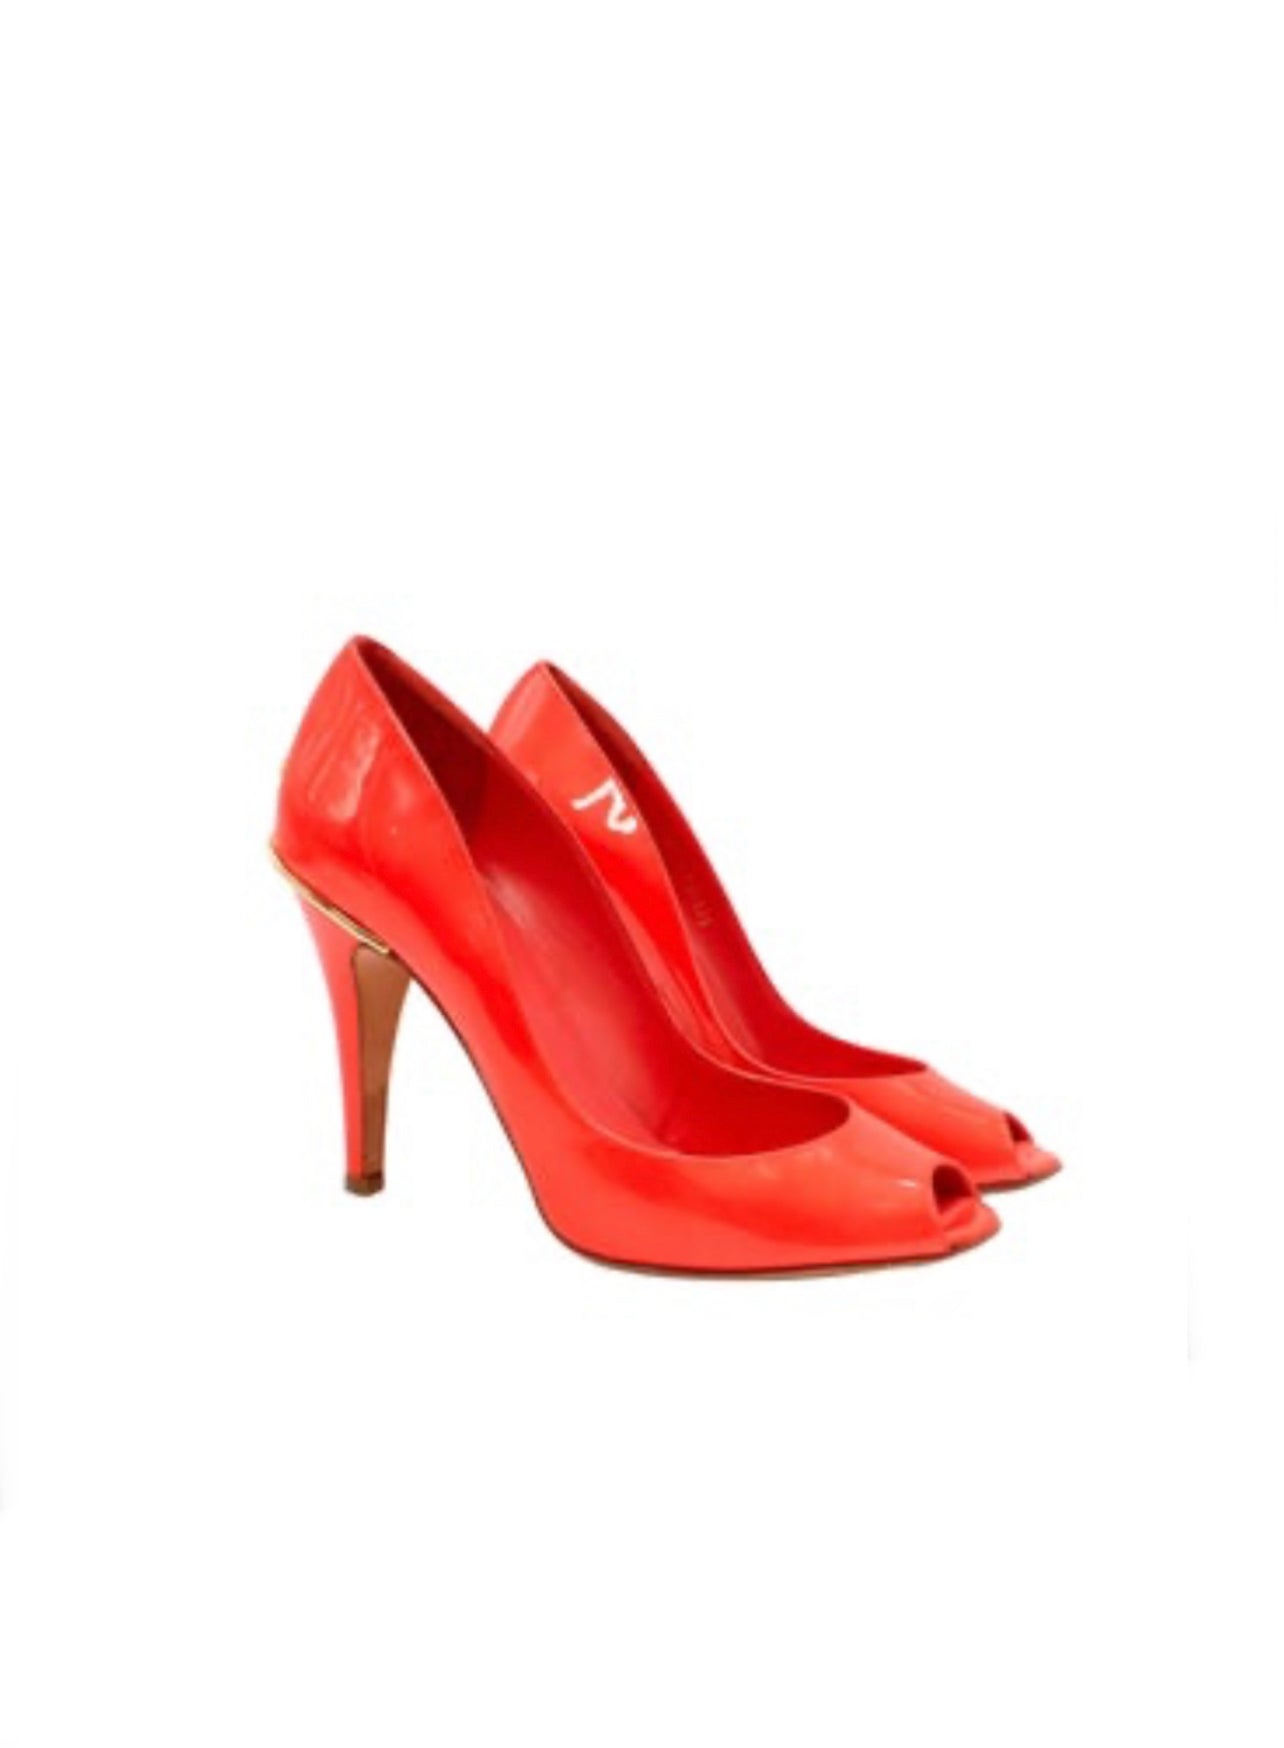 Load image into Gallery viewer, Chanel Coral Heels 2008 Cruise Collection
